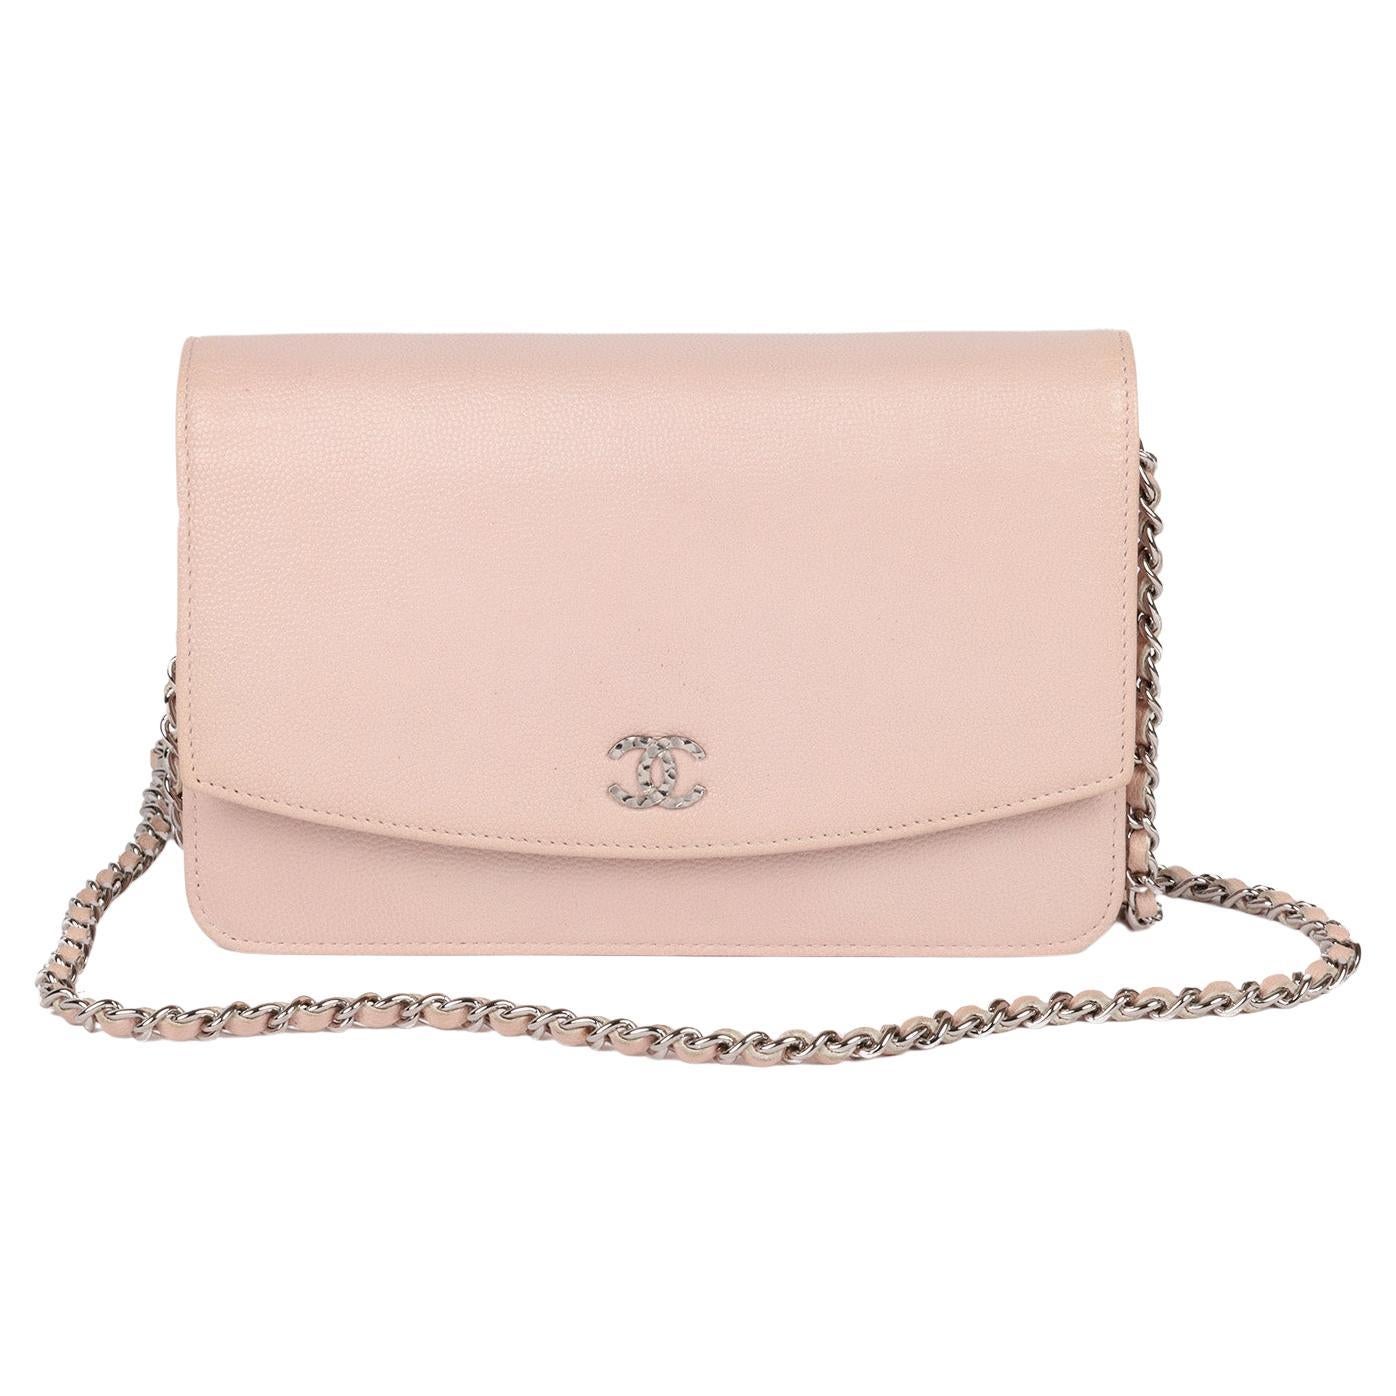 Chanel Blush Caviar Leather Wallet-On-Chain WOC For Sale